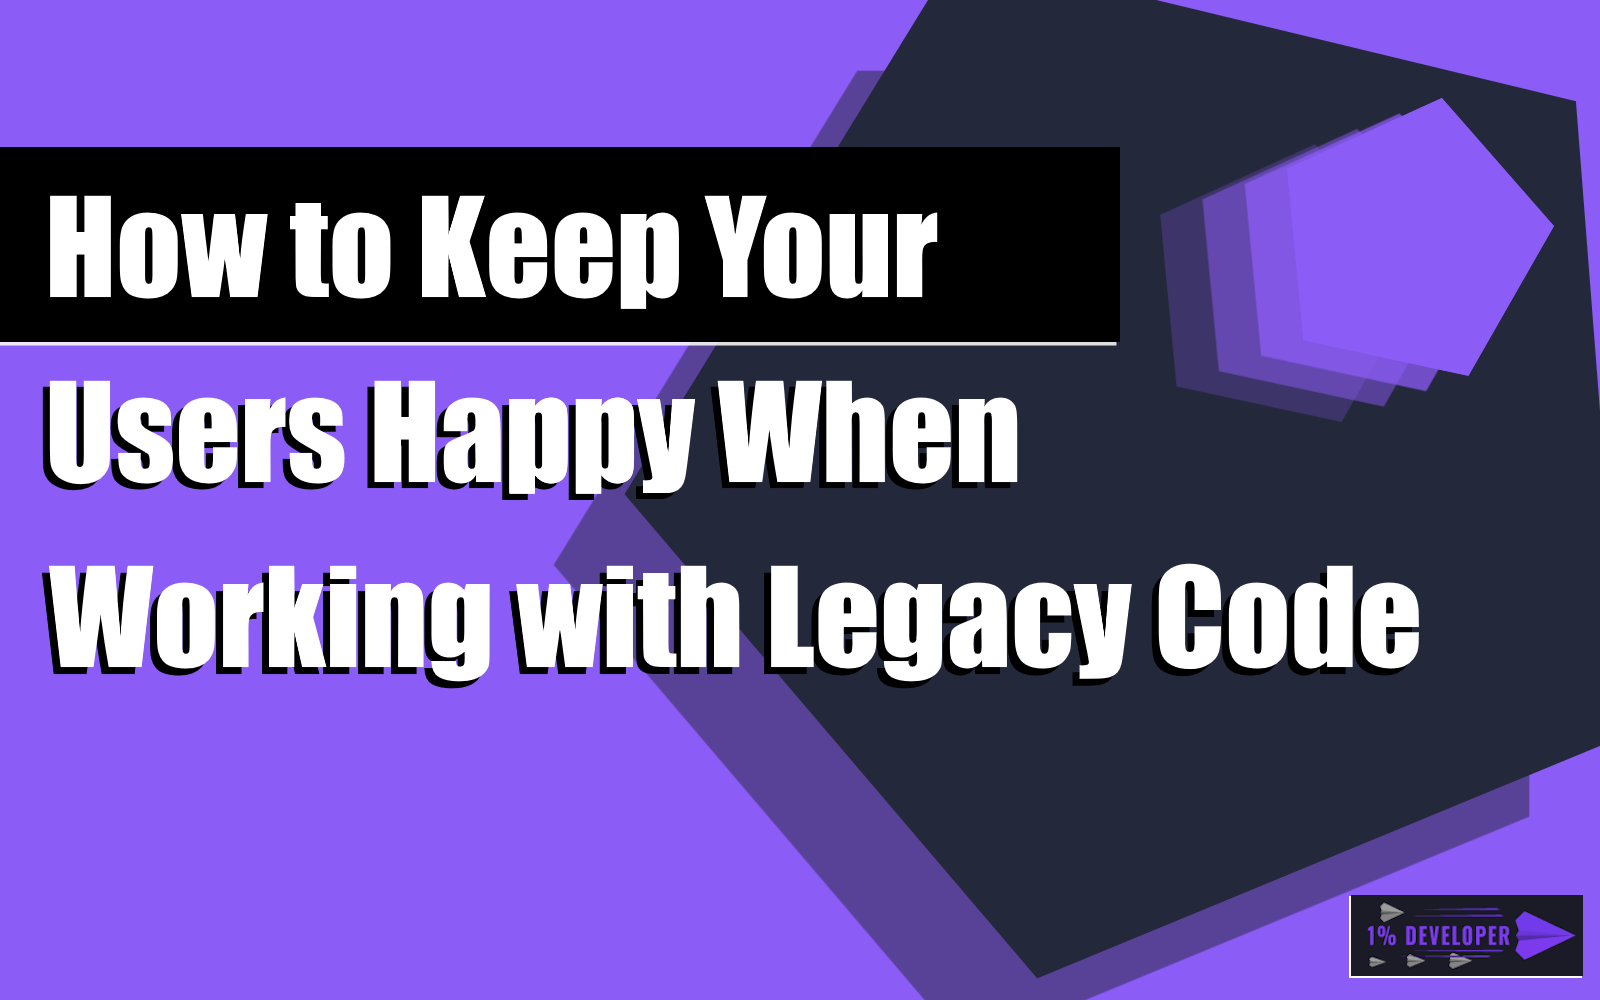 How to Keep Your Users Happy When Working with Legacy Code